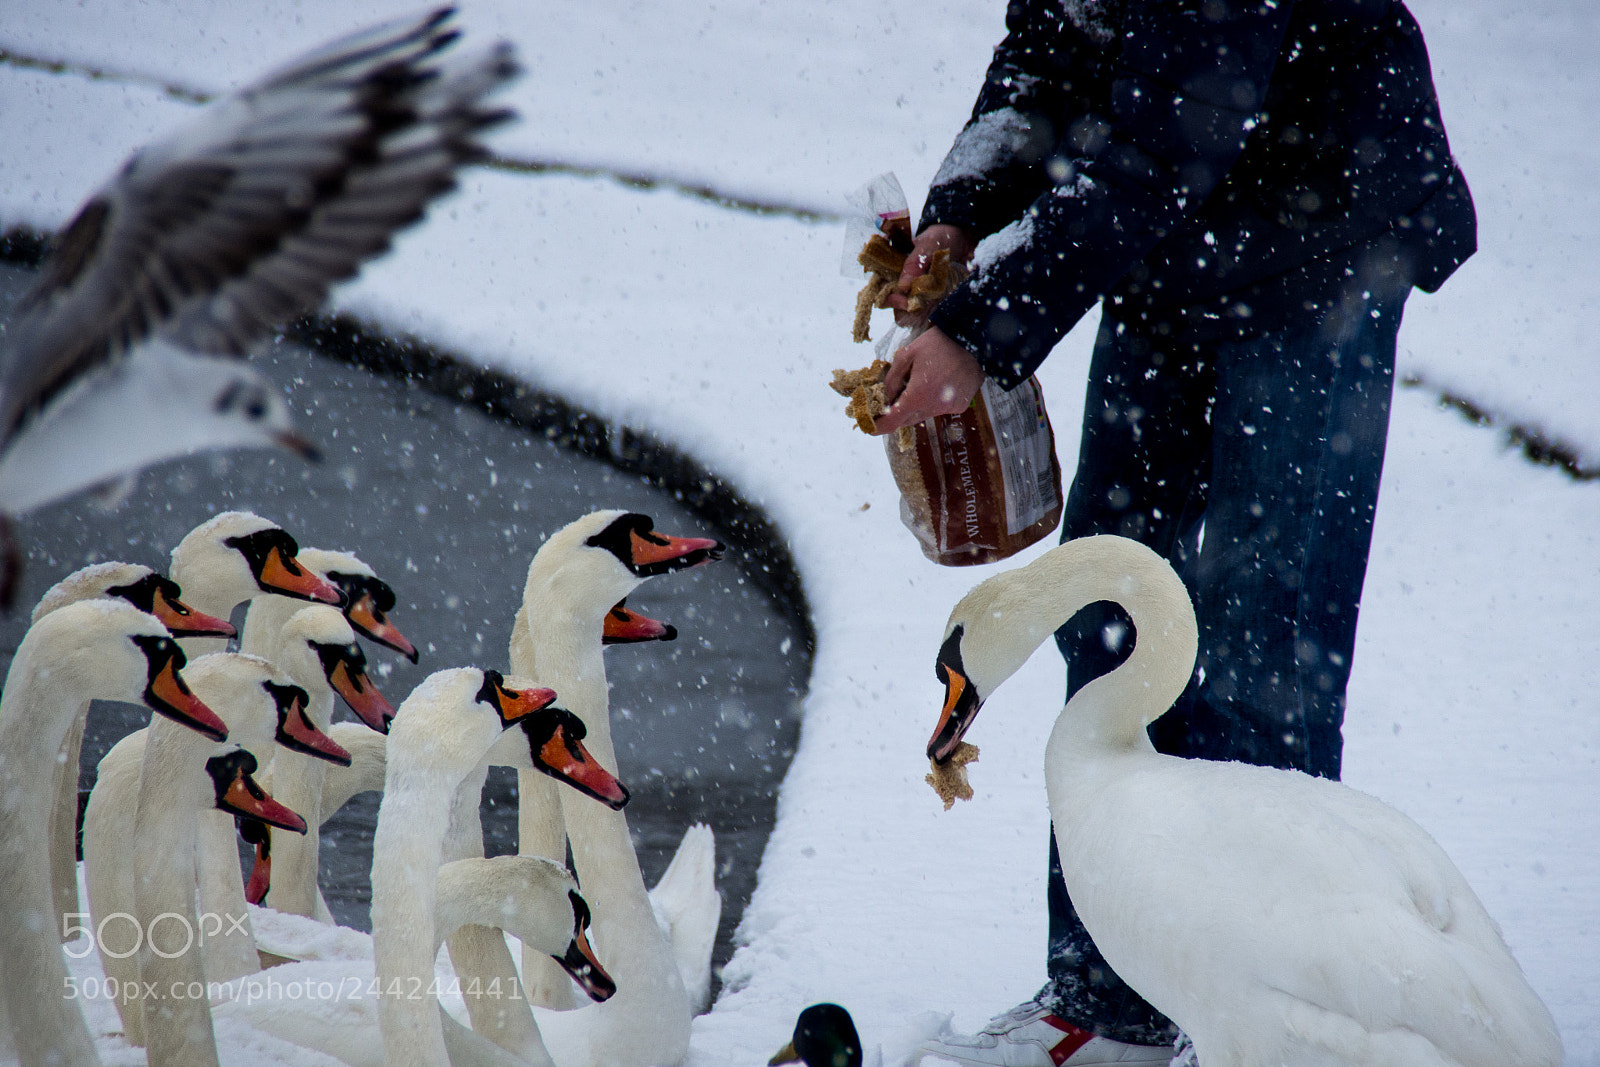 Pentax K-5 sample photo. Bread and snow photography